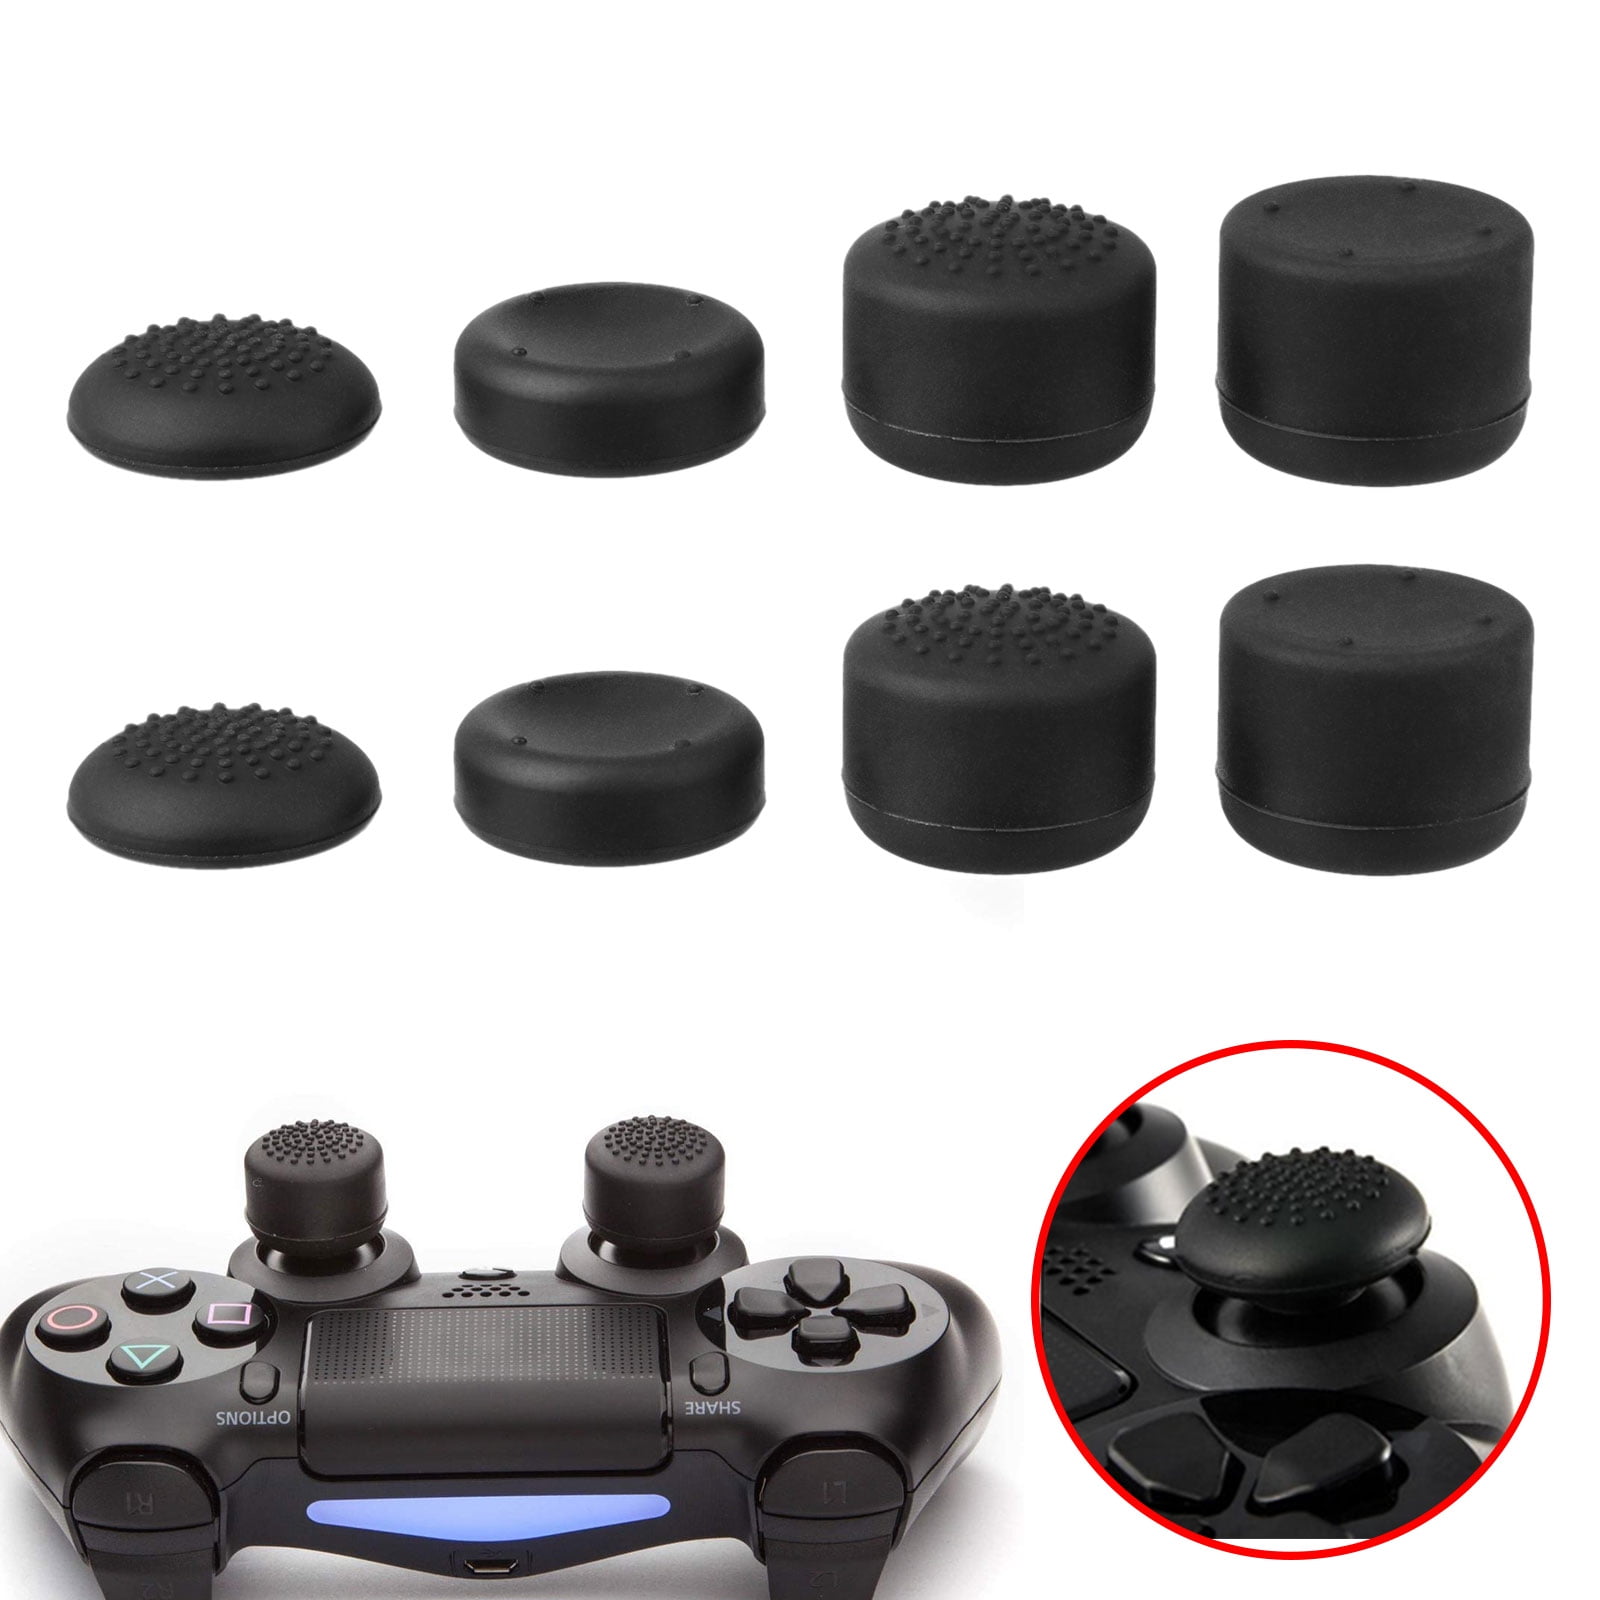 TSV PS4 Controller Dual Shock Skin Grip Anti-slip Silicone Cover Protector Case for Sony PS4/PS4 Slim/PS4 Pro Controller, 8 Thumb Grips